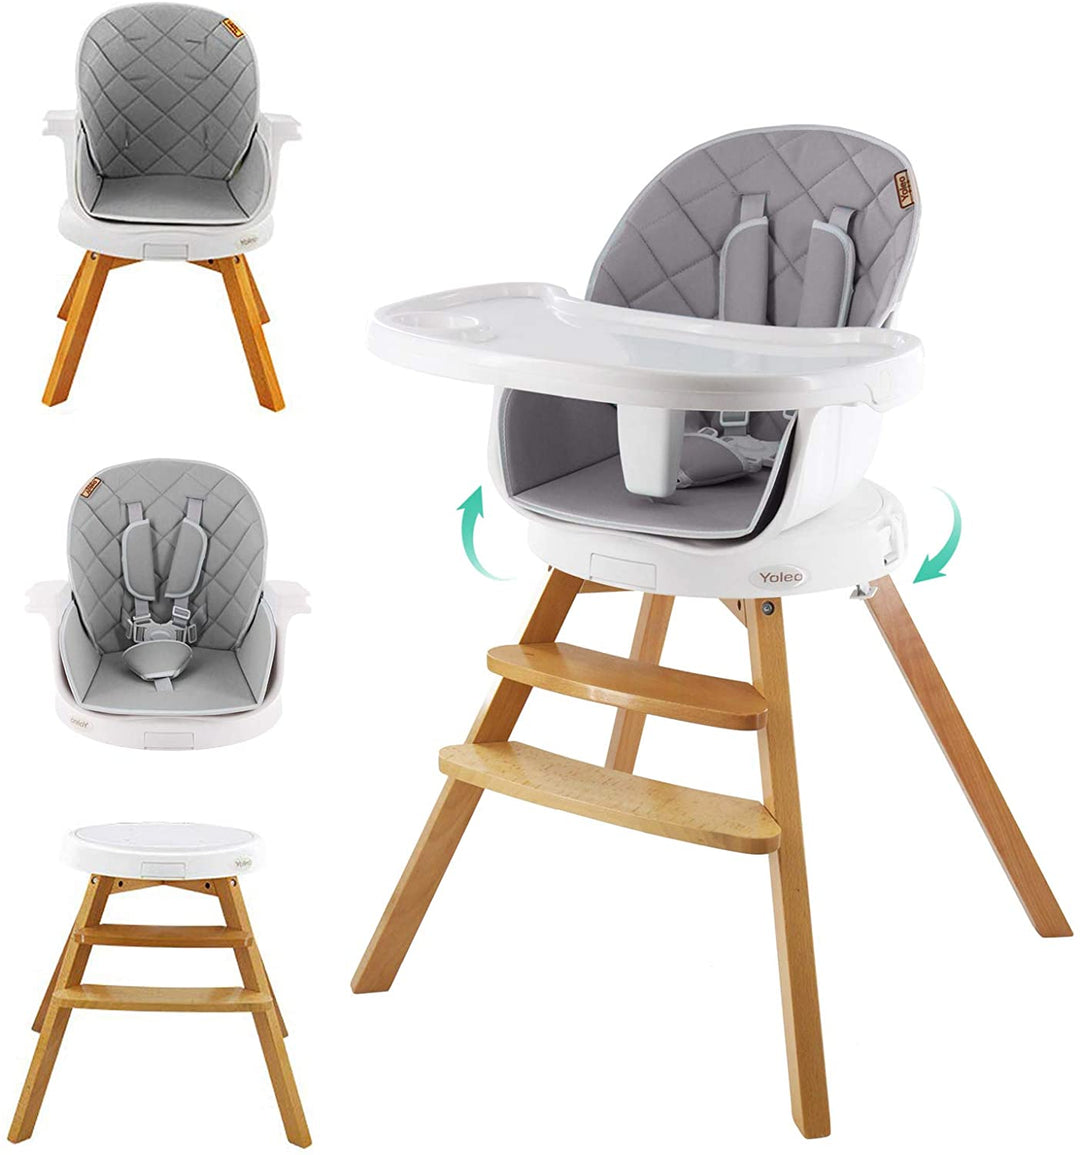 YOLEO High Chair for Toddlers Folding Compact Portable Booster